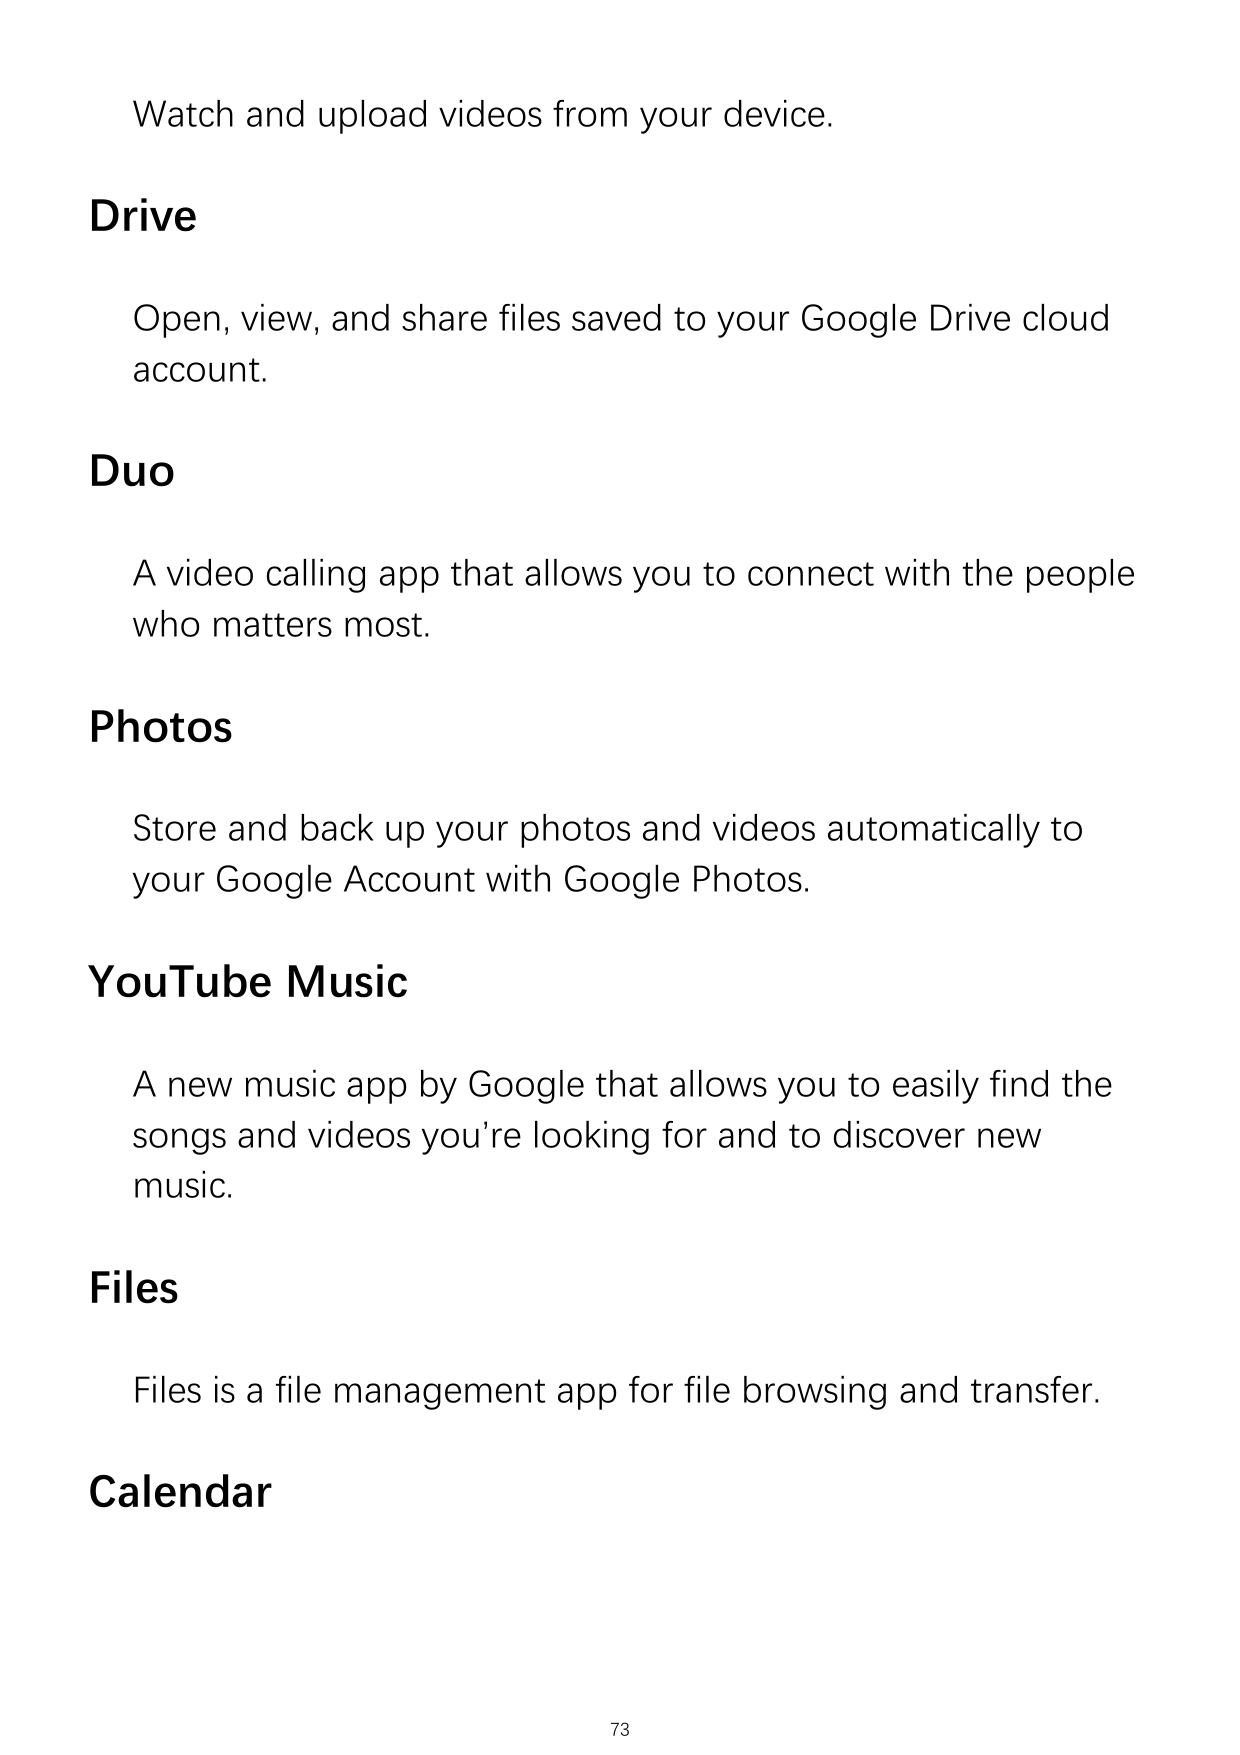 Watch and upload videos from your device.DriveOpen, view, and share files saved to your Google Drive cloudaccount.DuoA video cal